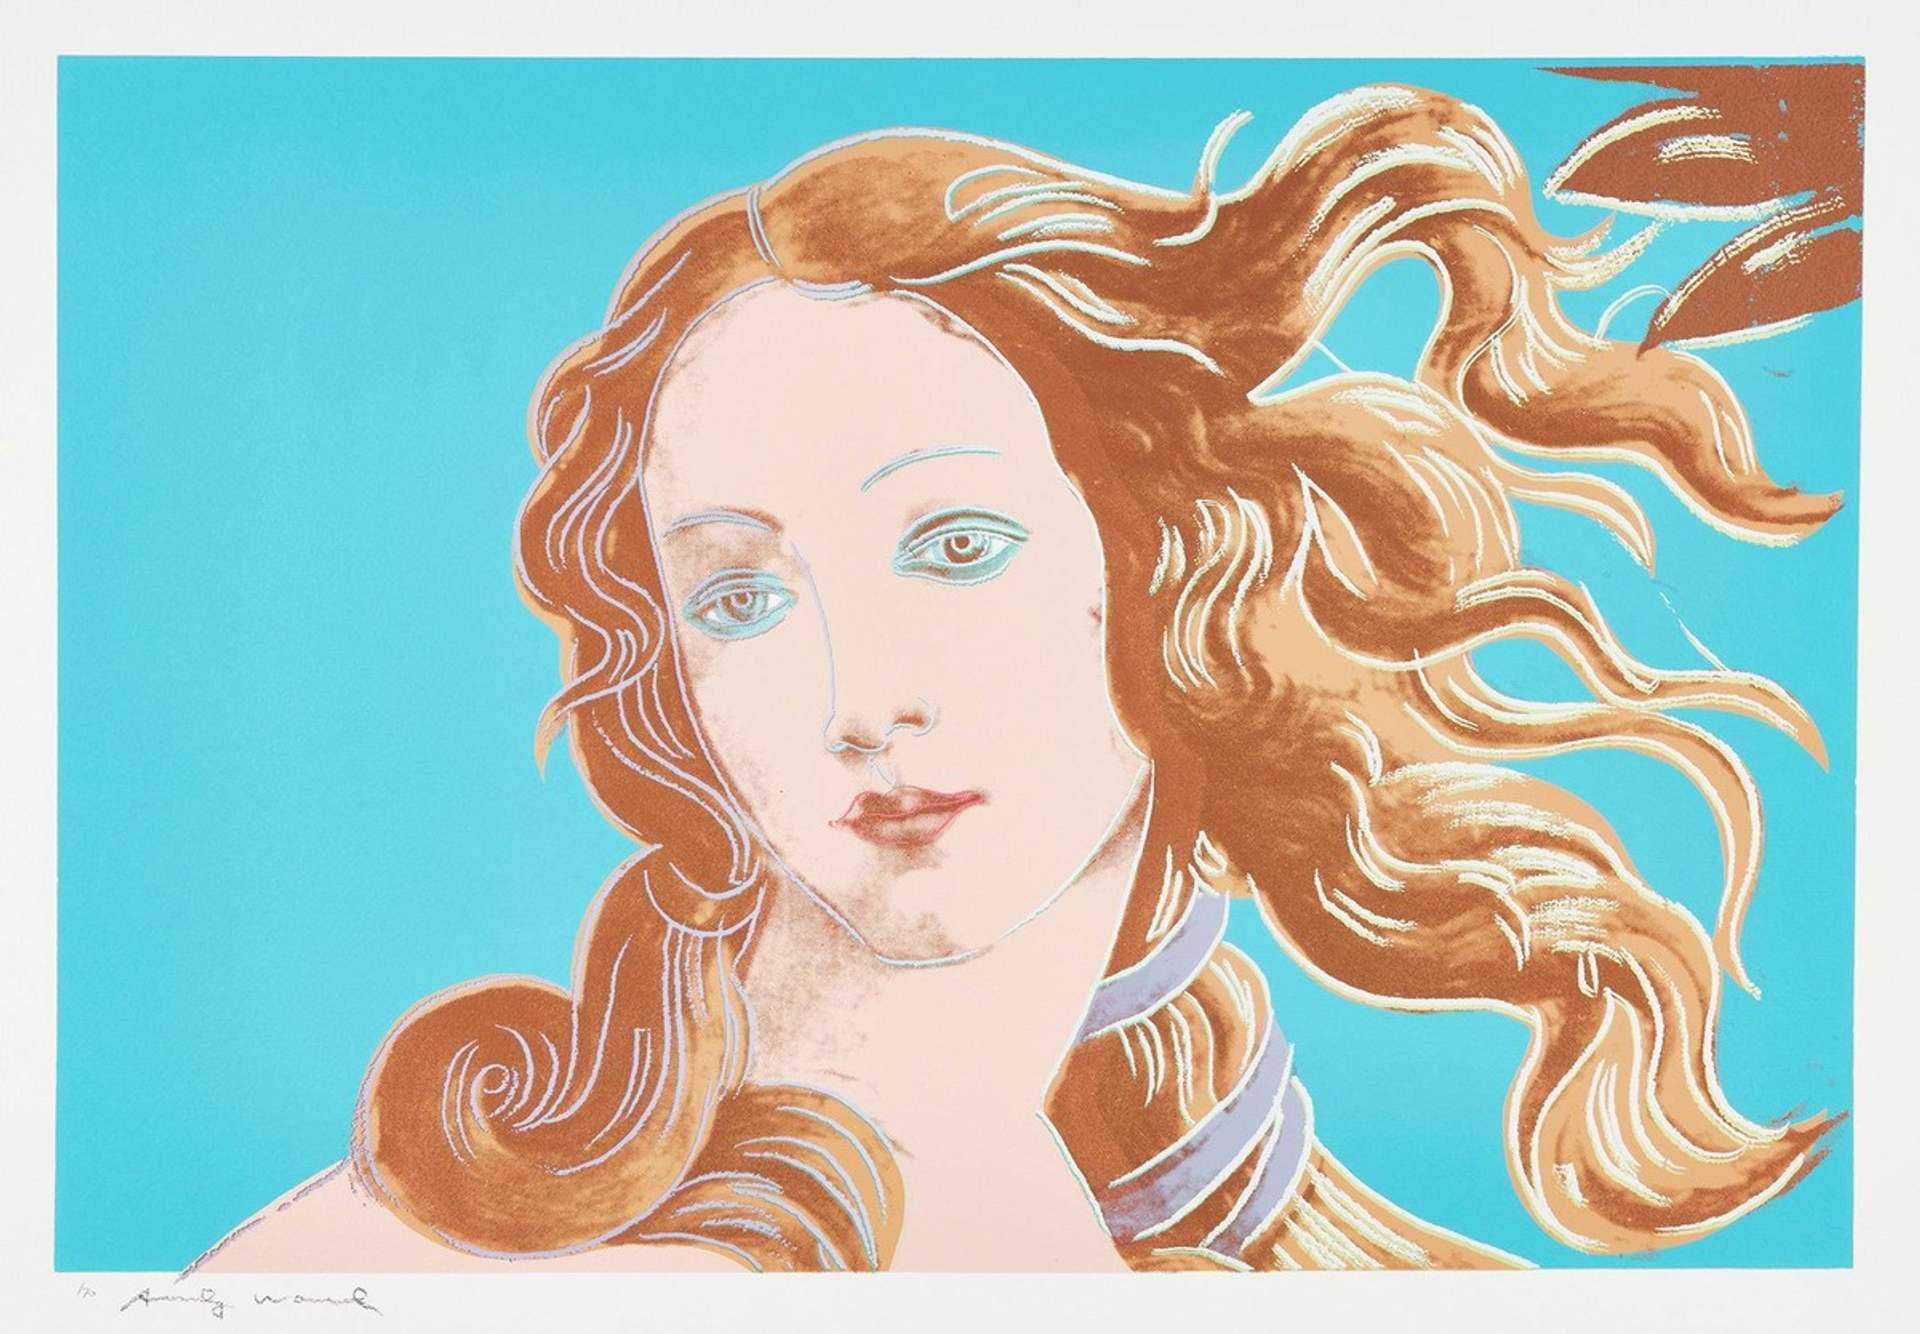 10 Facts About Andy Warhol's Renaissance Paintings